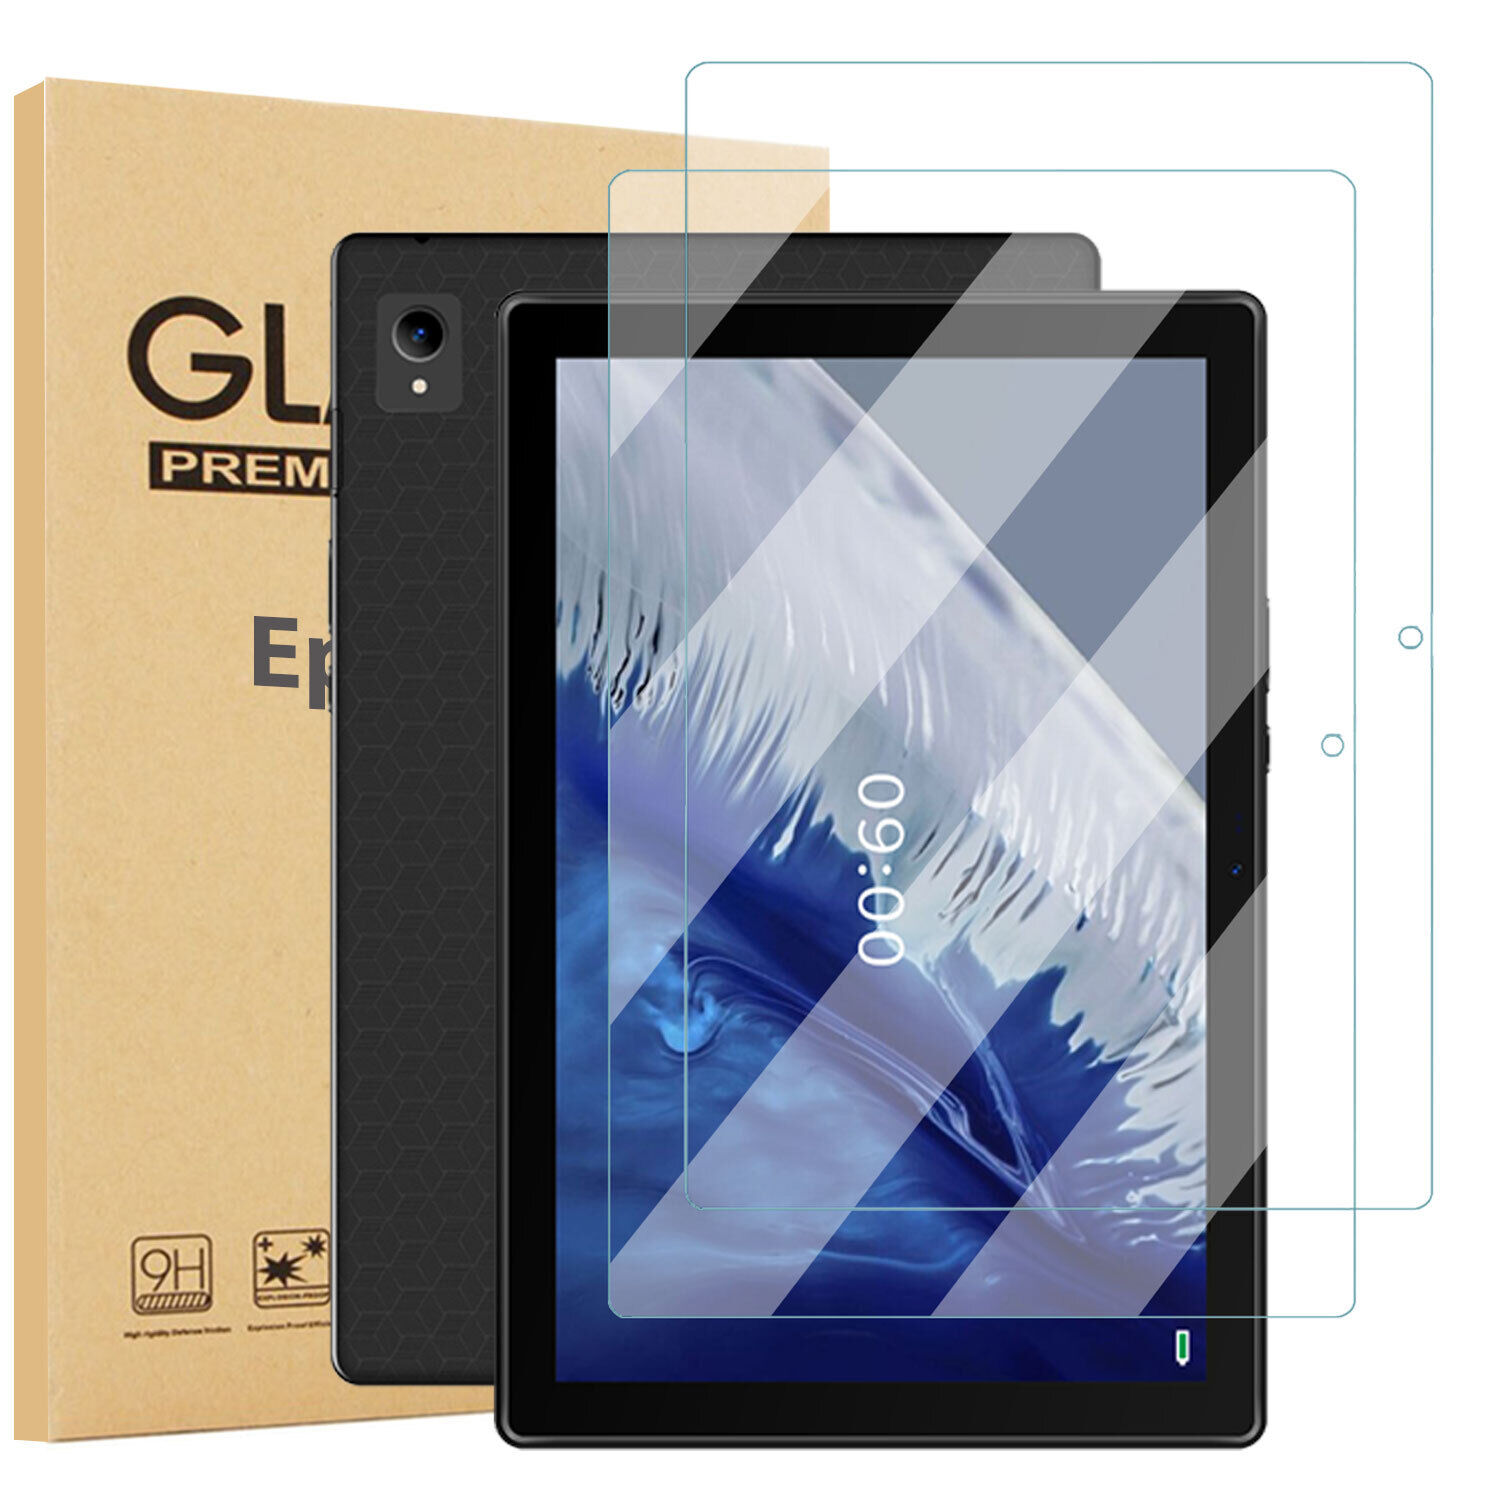 Vortex CMG101 Screen Protector Cover Tempered Glass for CMG101 Tablet 10.1 Inch